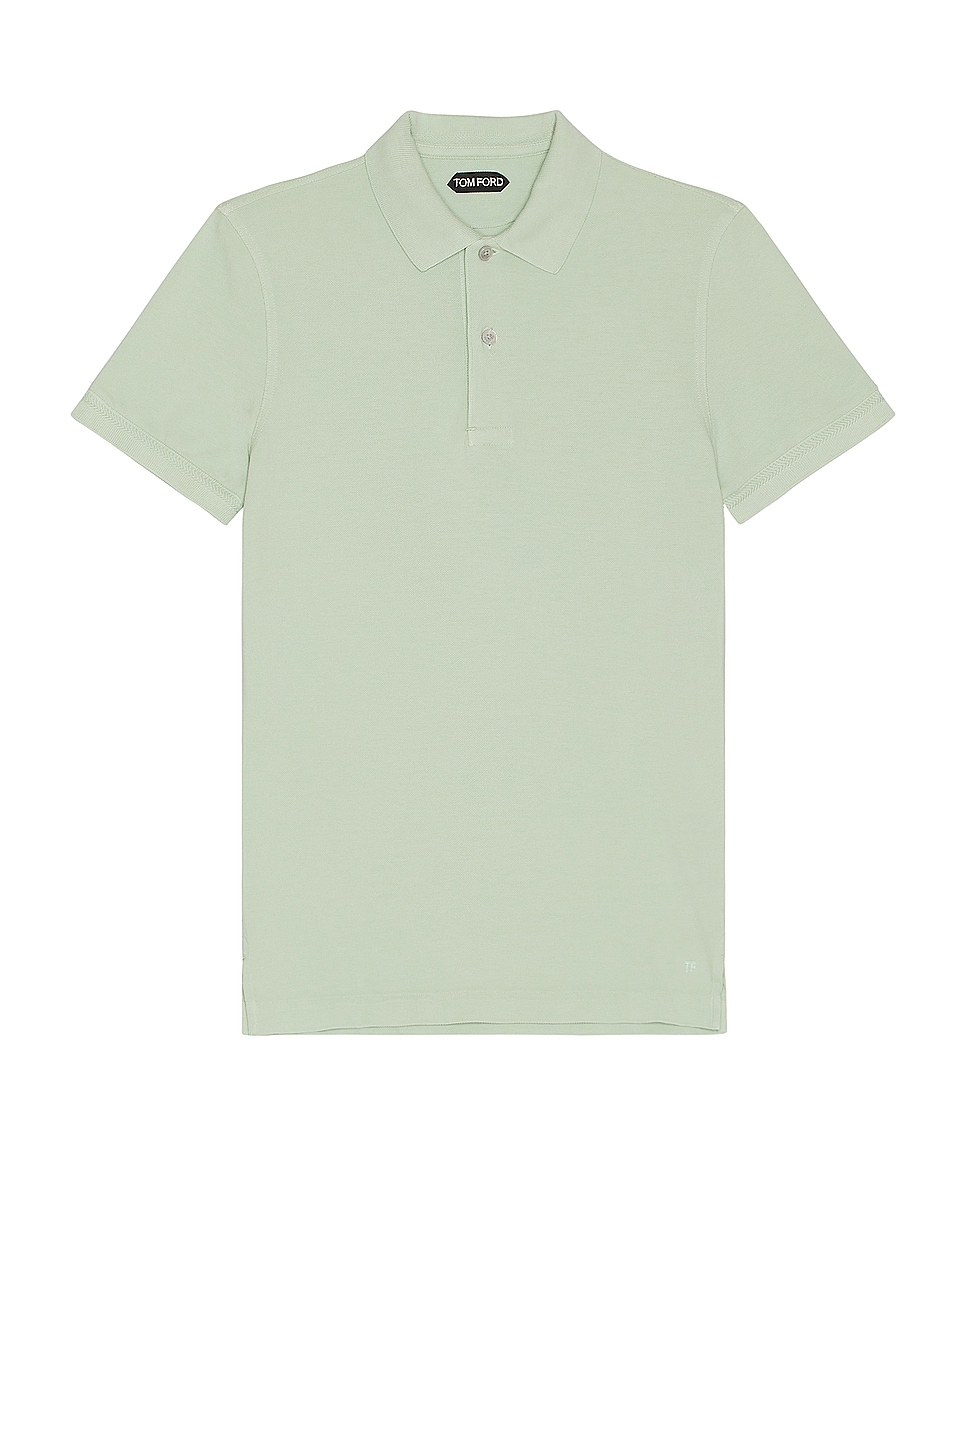 Image 1 of TOM FORD Tennis Piquet Polo in Pale Mint